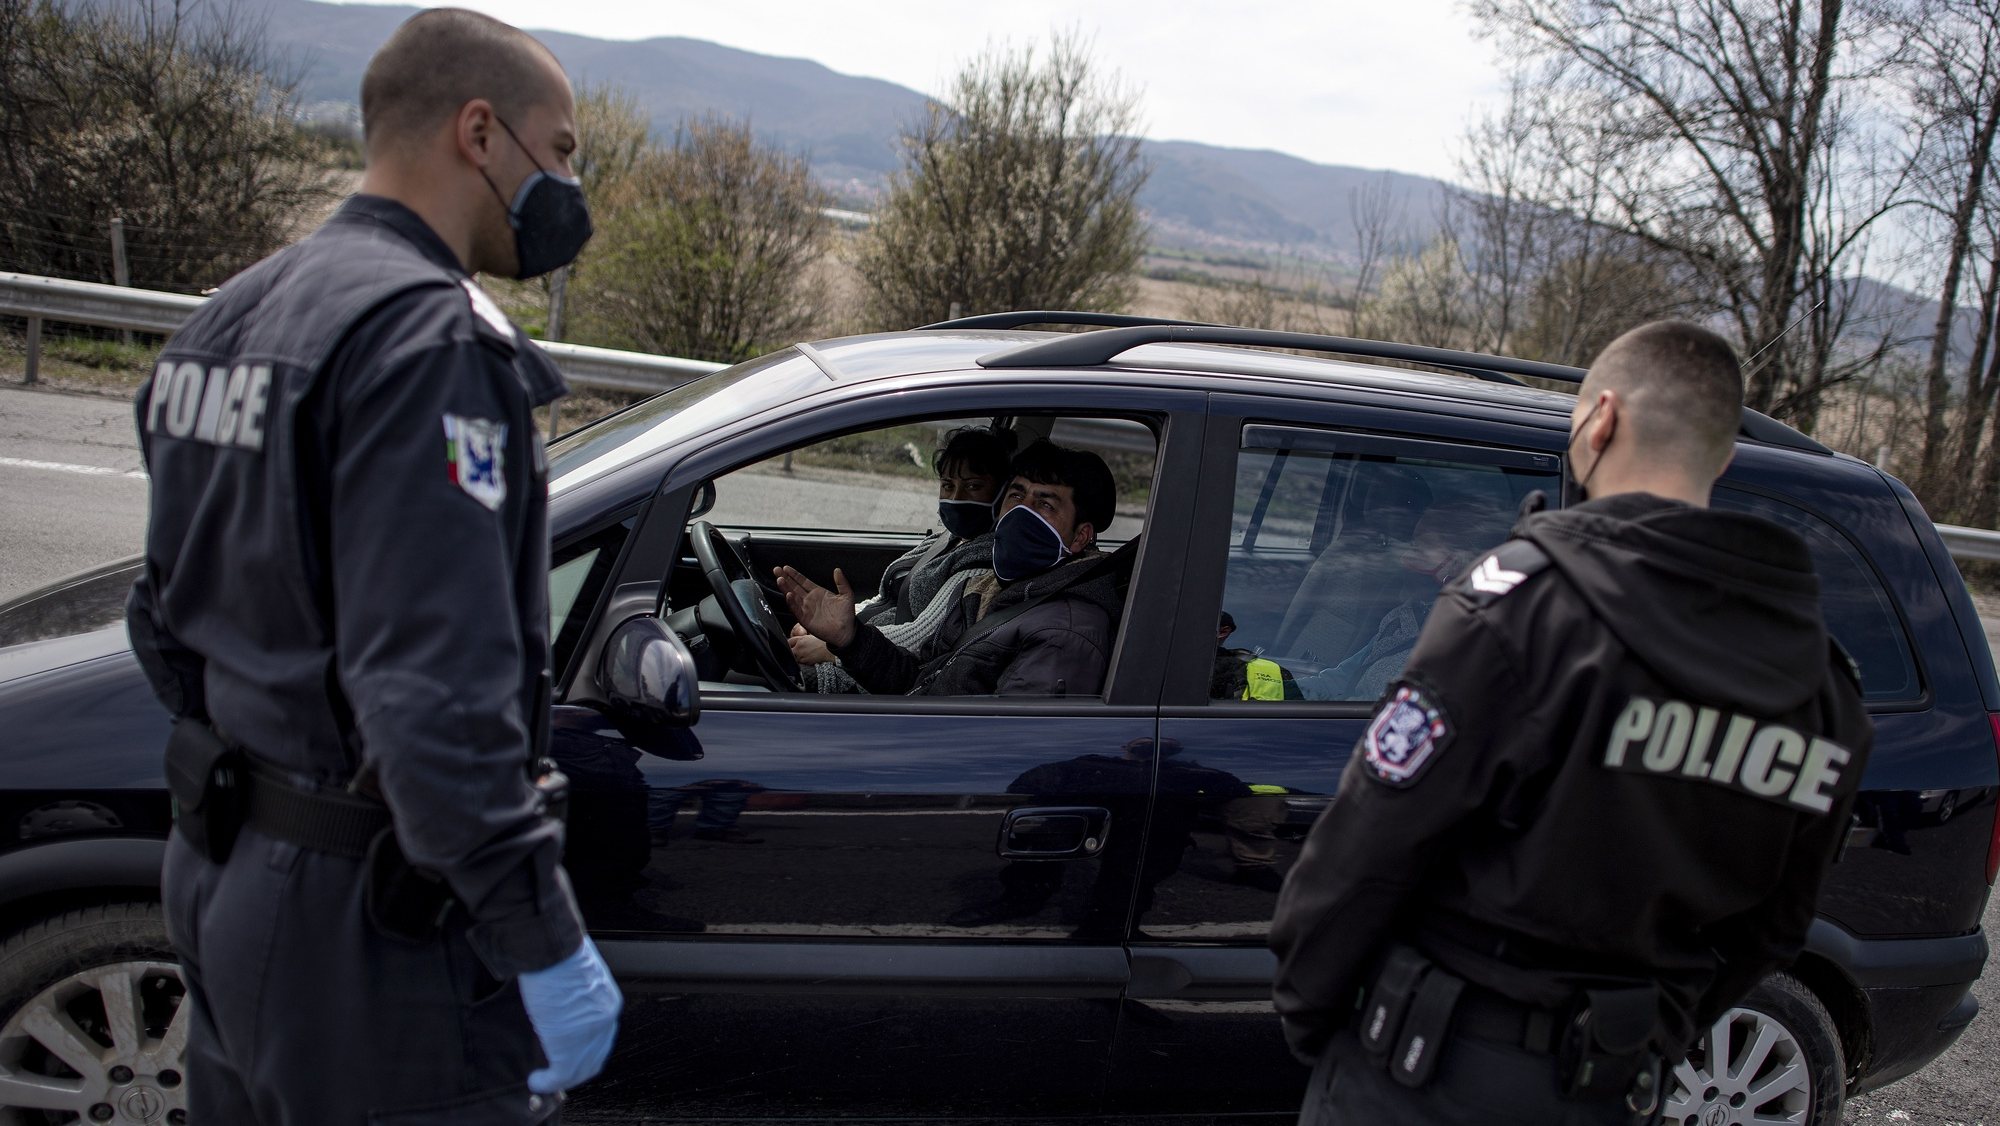 epa08368788 Bulgarian police officers check the documents of motorists at a check point on the highway Hemus in Sofia, Bulgaria, 17 April 2020, during the coronavirus disease (COVID-19) pandemic. Bulgarian authorities banned all traffic in and out of the capital Sofia from 17 April until further notice as the country tightened measures to counter the spread of the COVID-19 infectious disease. The measure coincides with a four-day weekend, when Bulgaria celebrates the Orthodox Easter on 19 April. The travel ban envisages all type of cars and intercity buses, except for vehicles for cargo purposes, vehicles with people travelling for medical treatment, emergency crews of electric and water companies, internet and TV service providers.  EPA/VASSIL DONEV